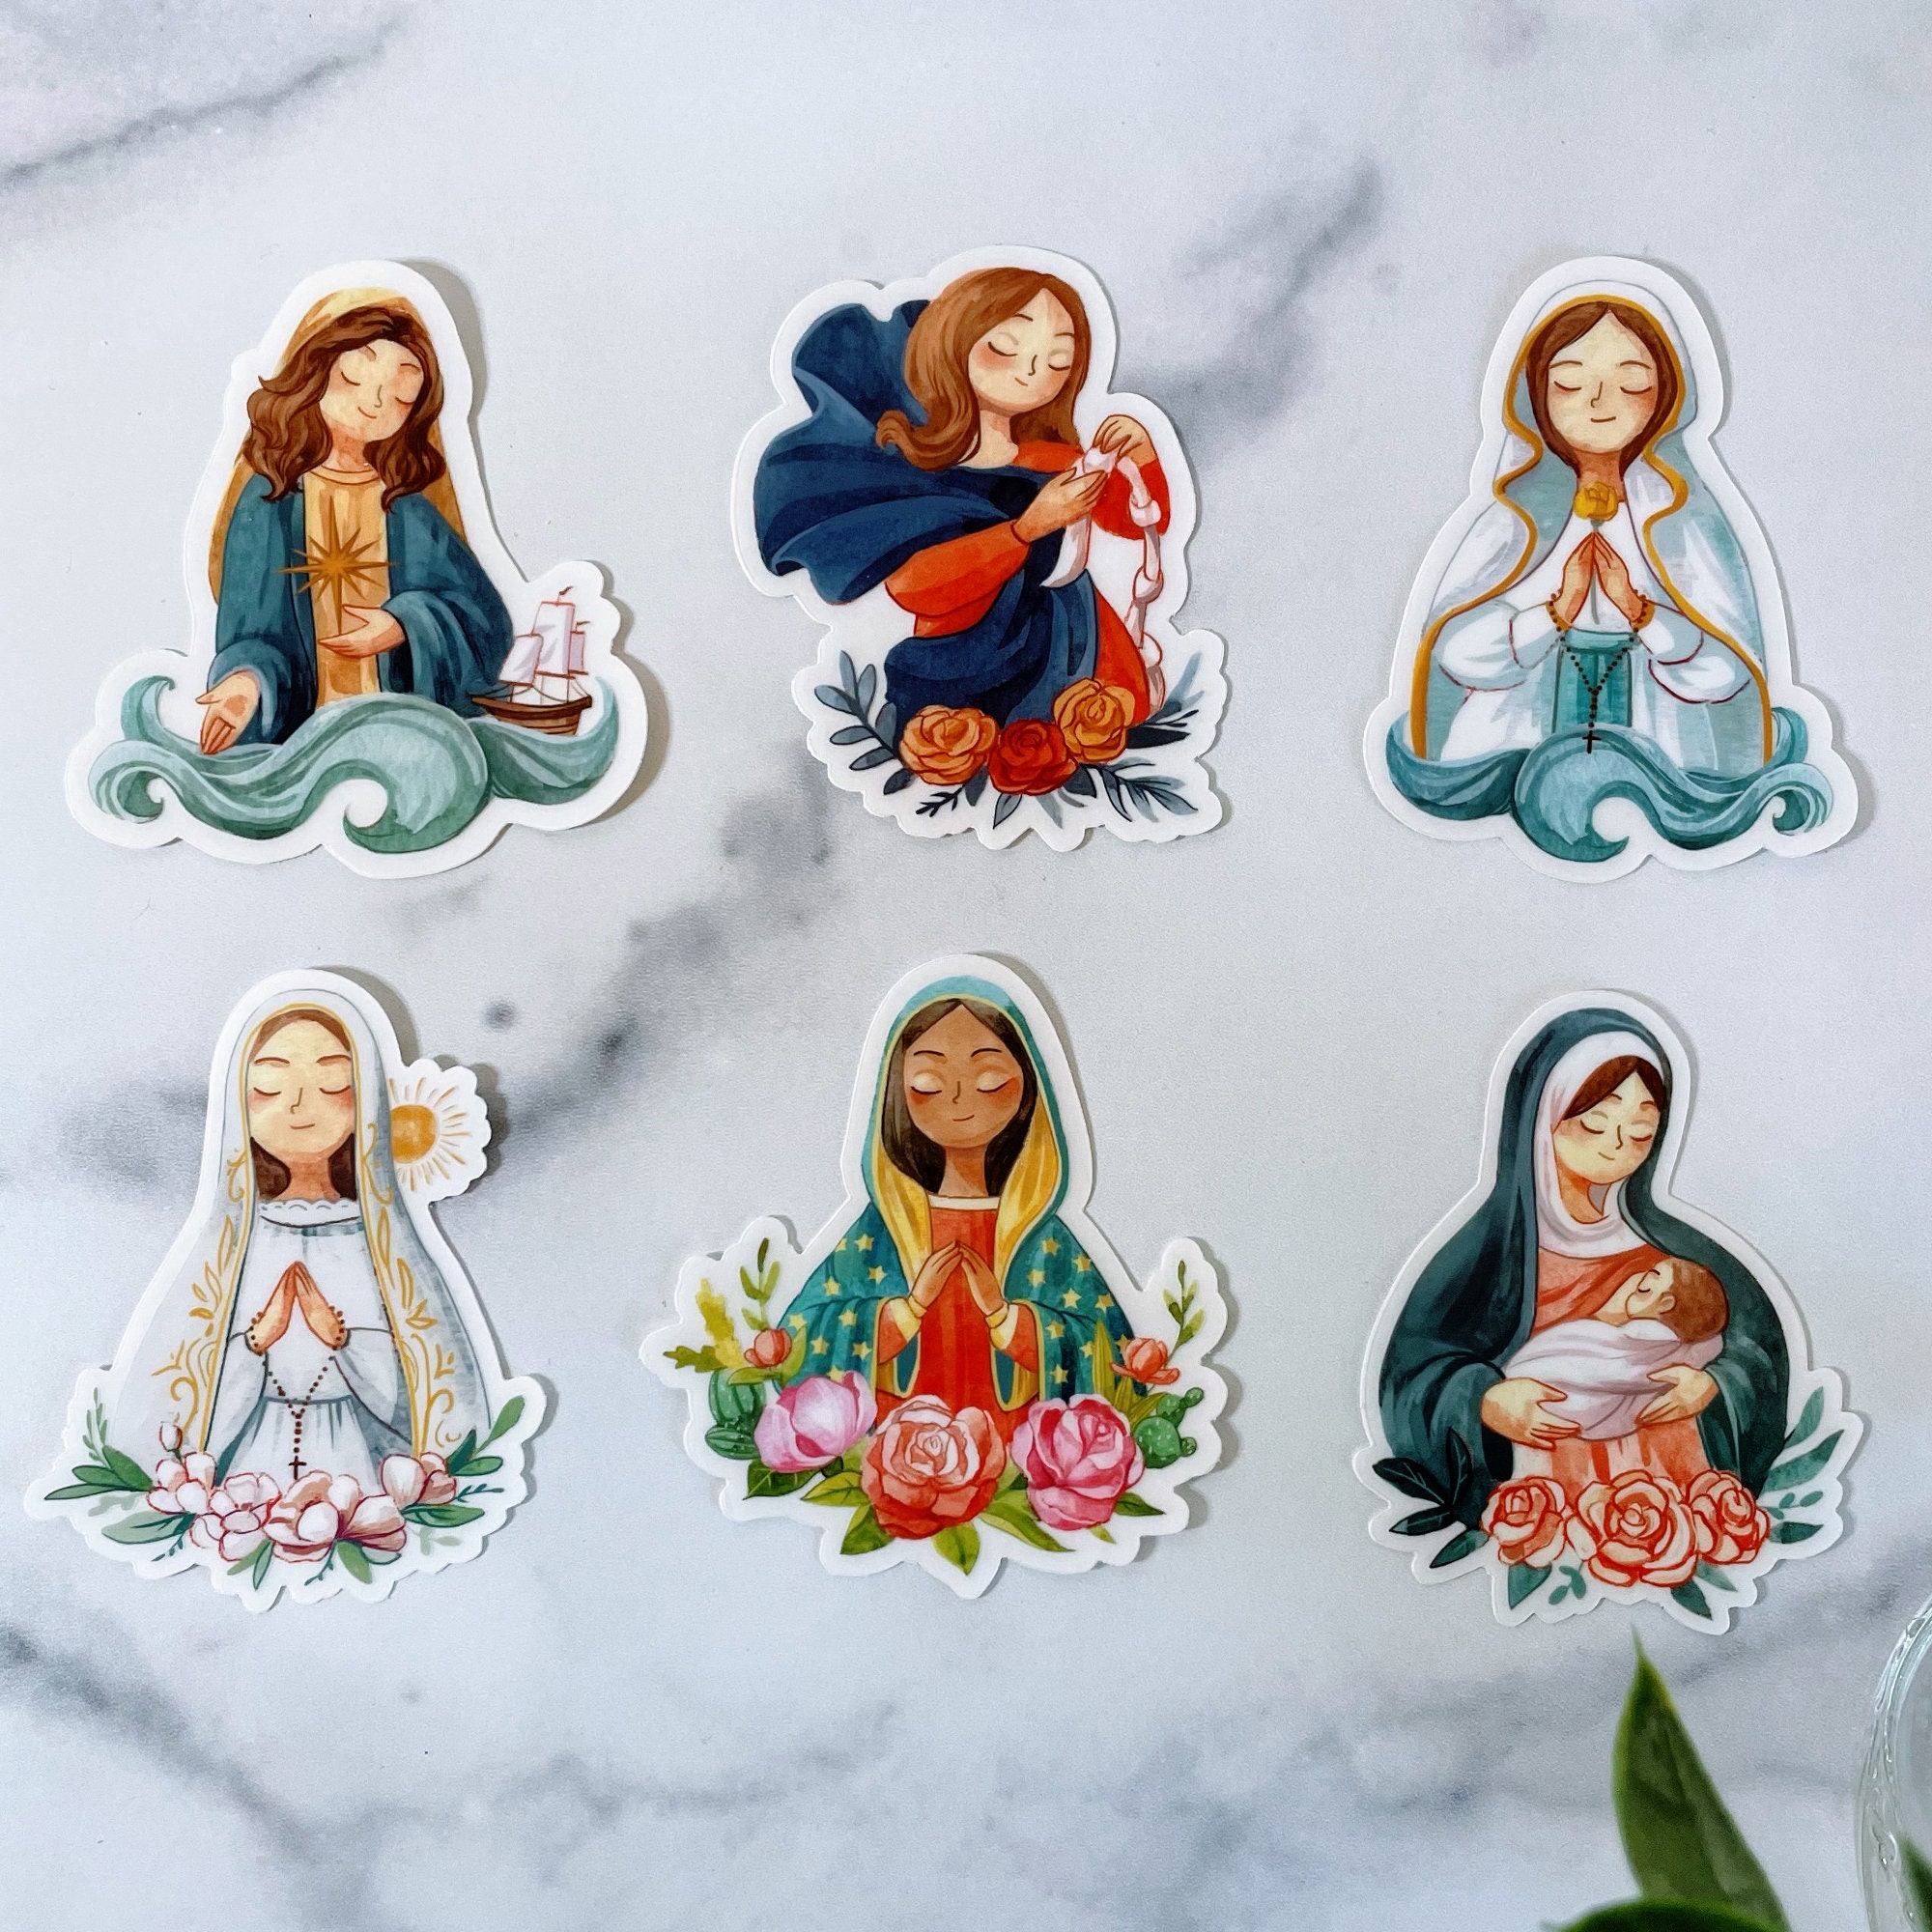 Hail Holy Queen Stickers, Catholic Stickers, Virgin Mary Stickers